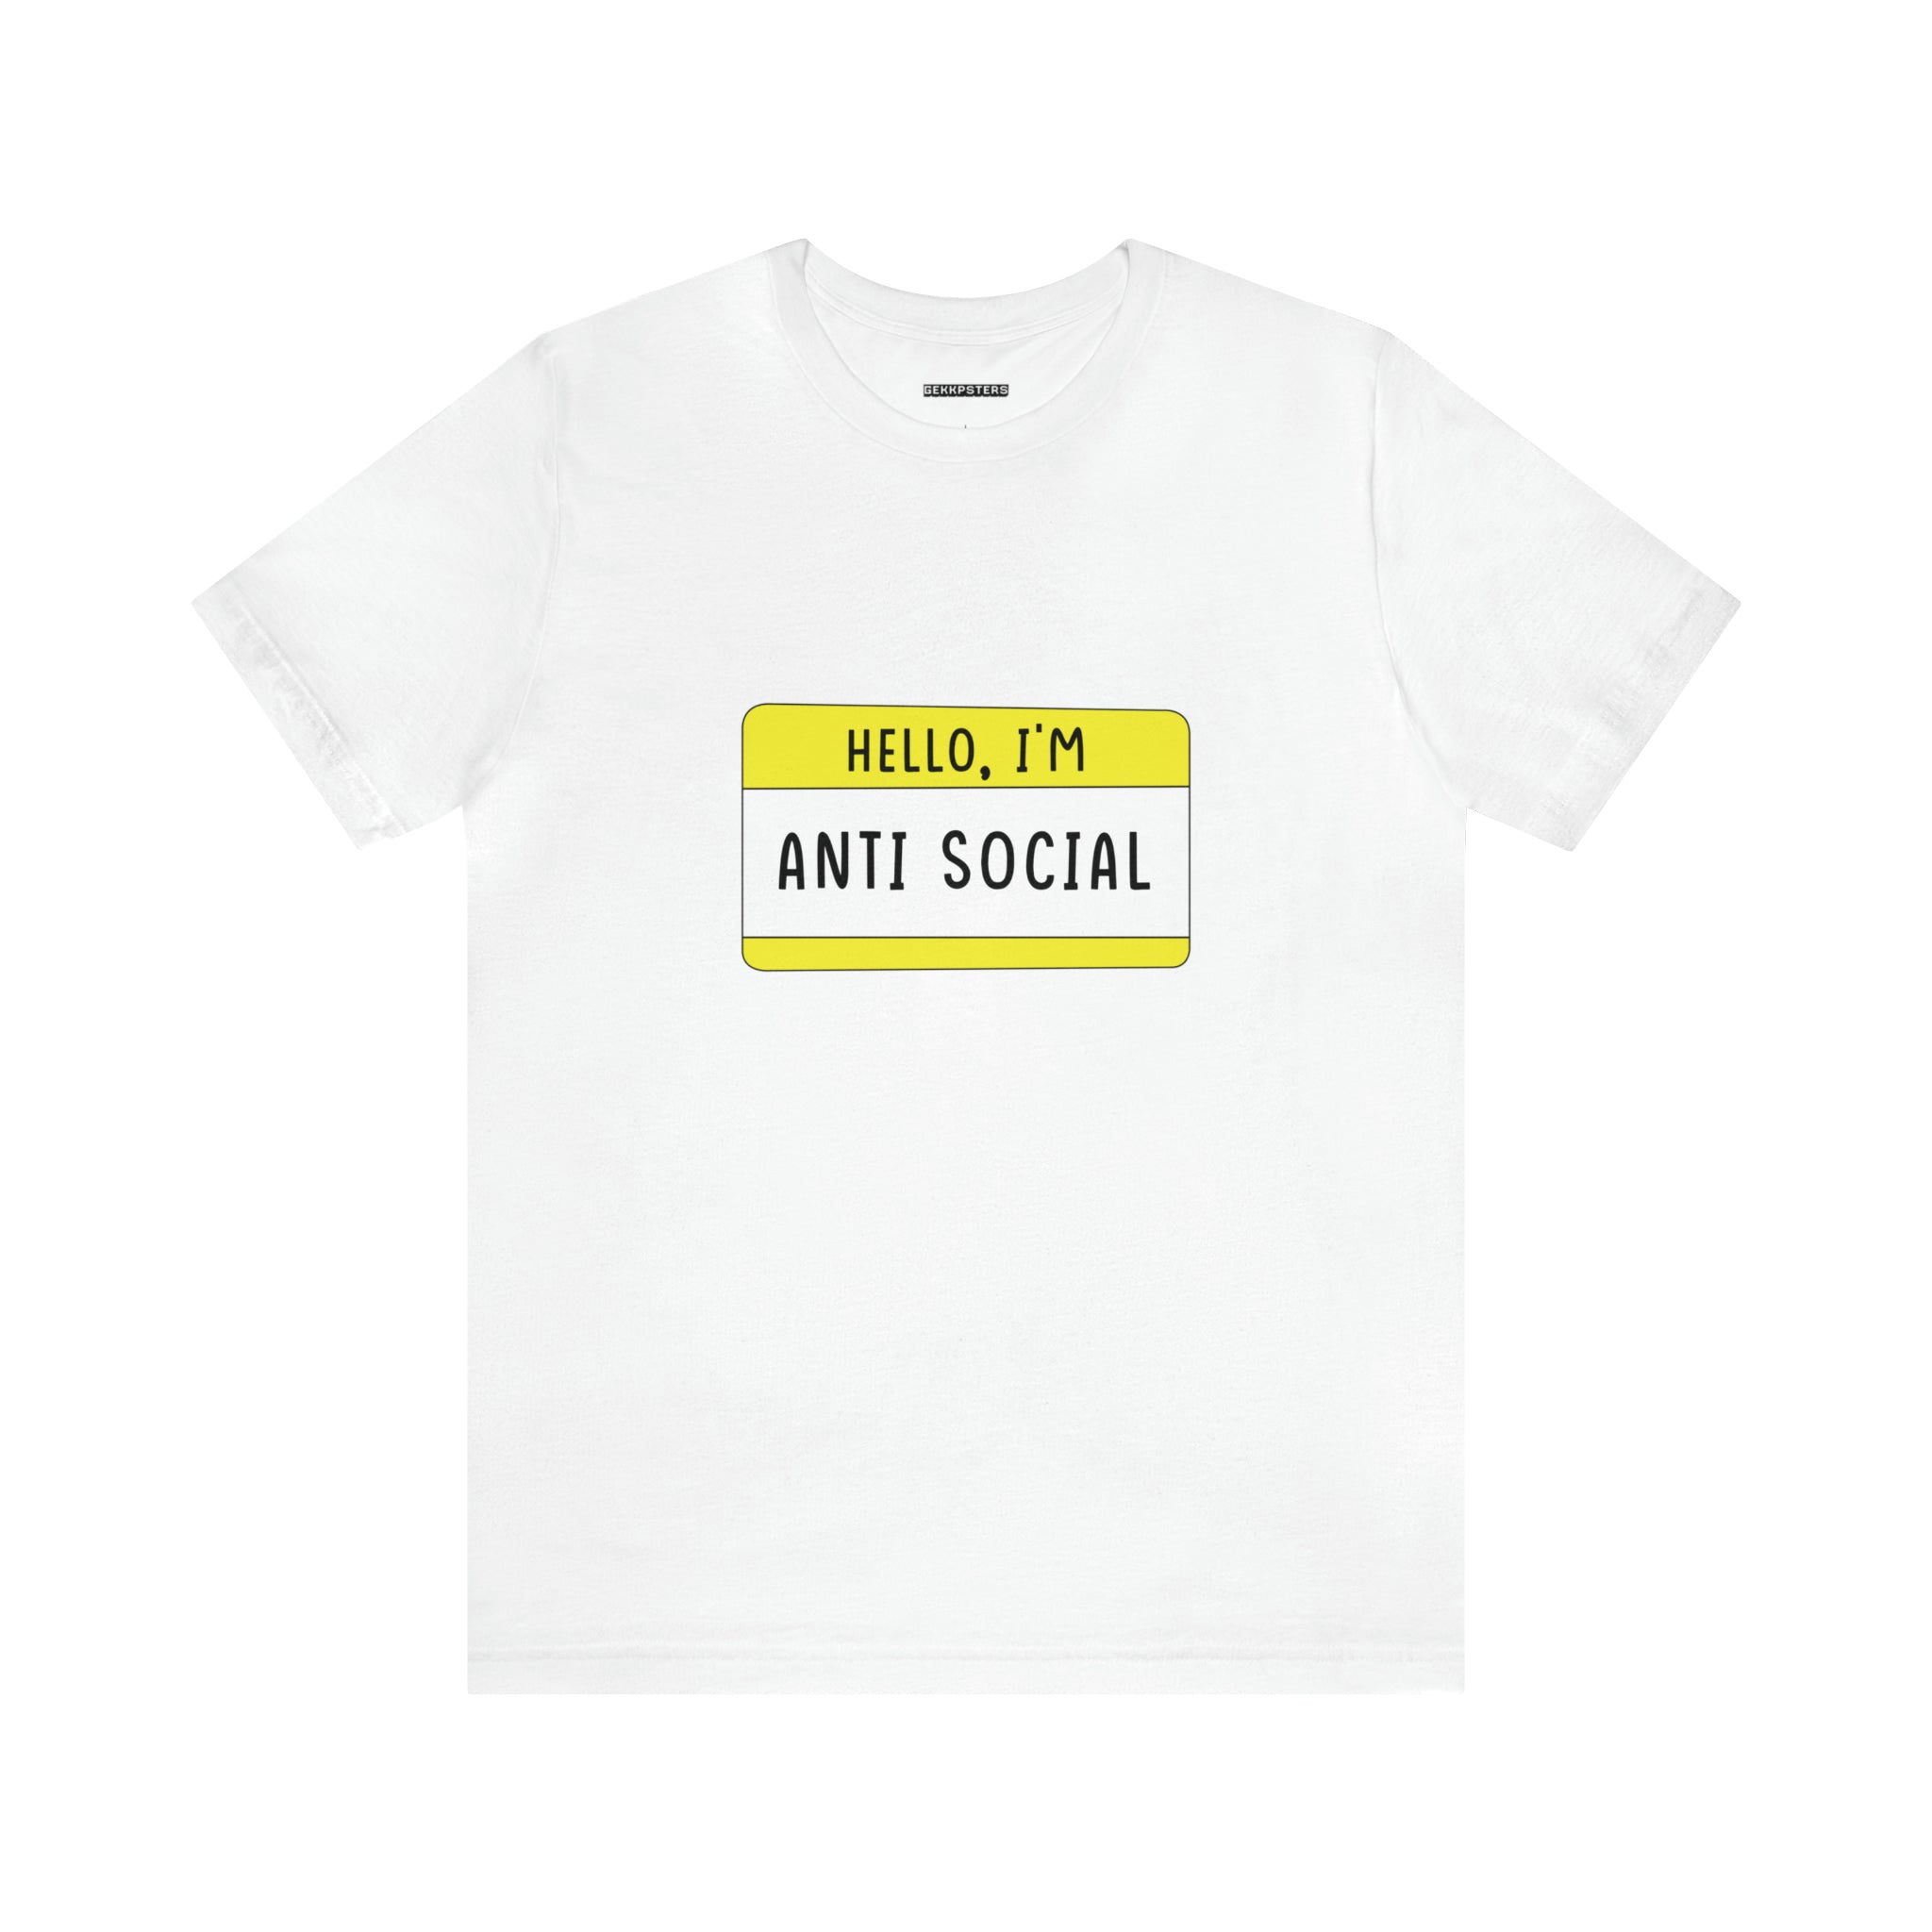 A plain white Hello, I'm Anti Social T-shirt featuring a unique design with a yellow name tag graphic on the chest that reads "hello, i'm anti social" in black text.